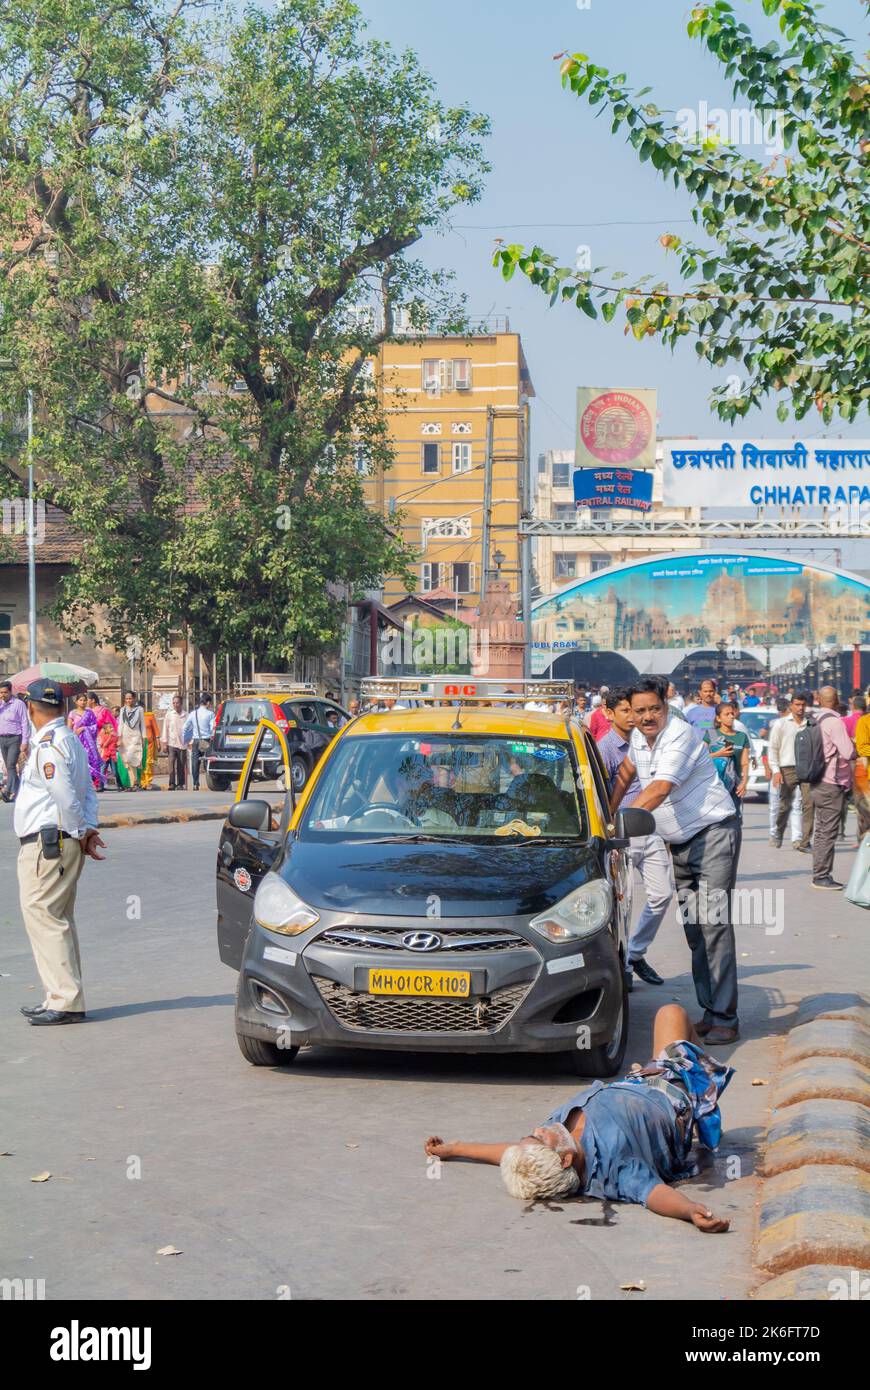 Mumbai, Maharashtra, South India, 31th of December 2019: A taxi and a drunk man laying in the street. Stock Photo